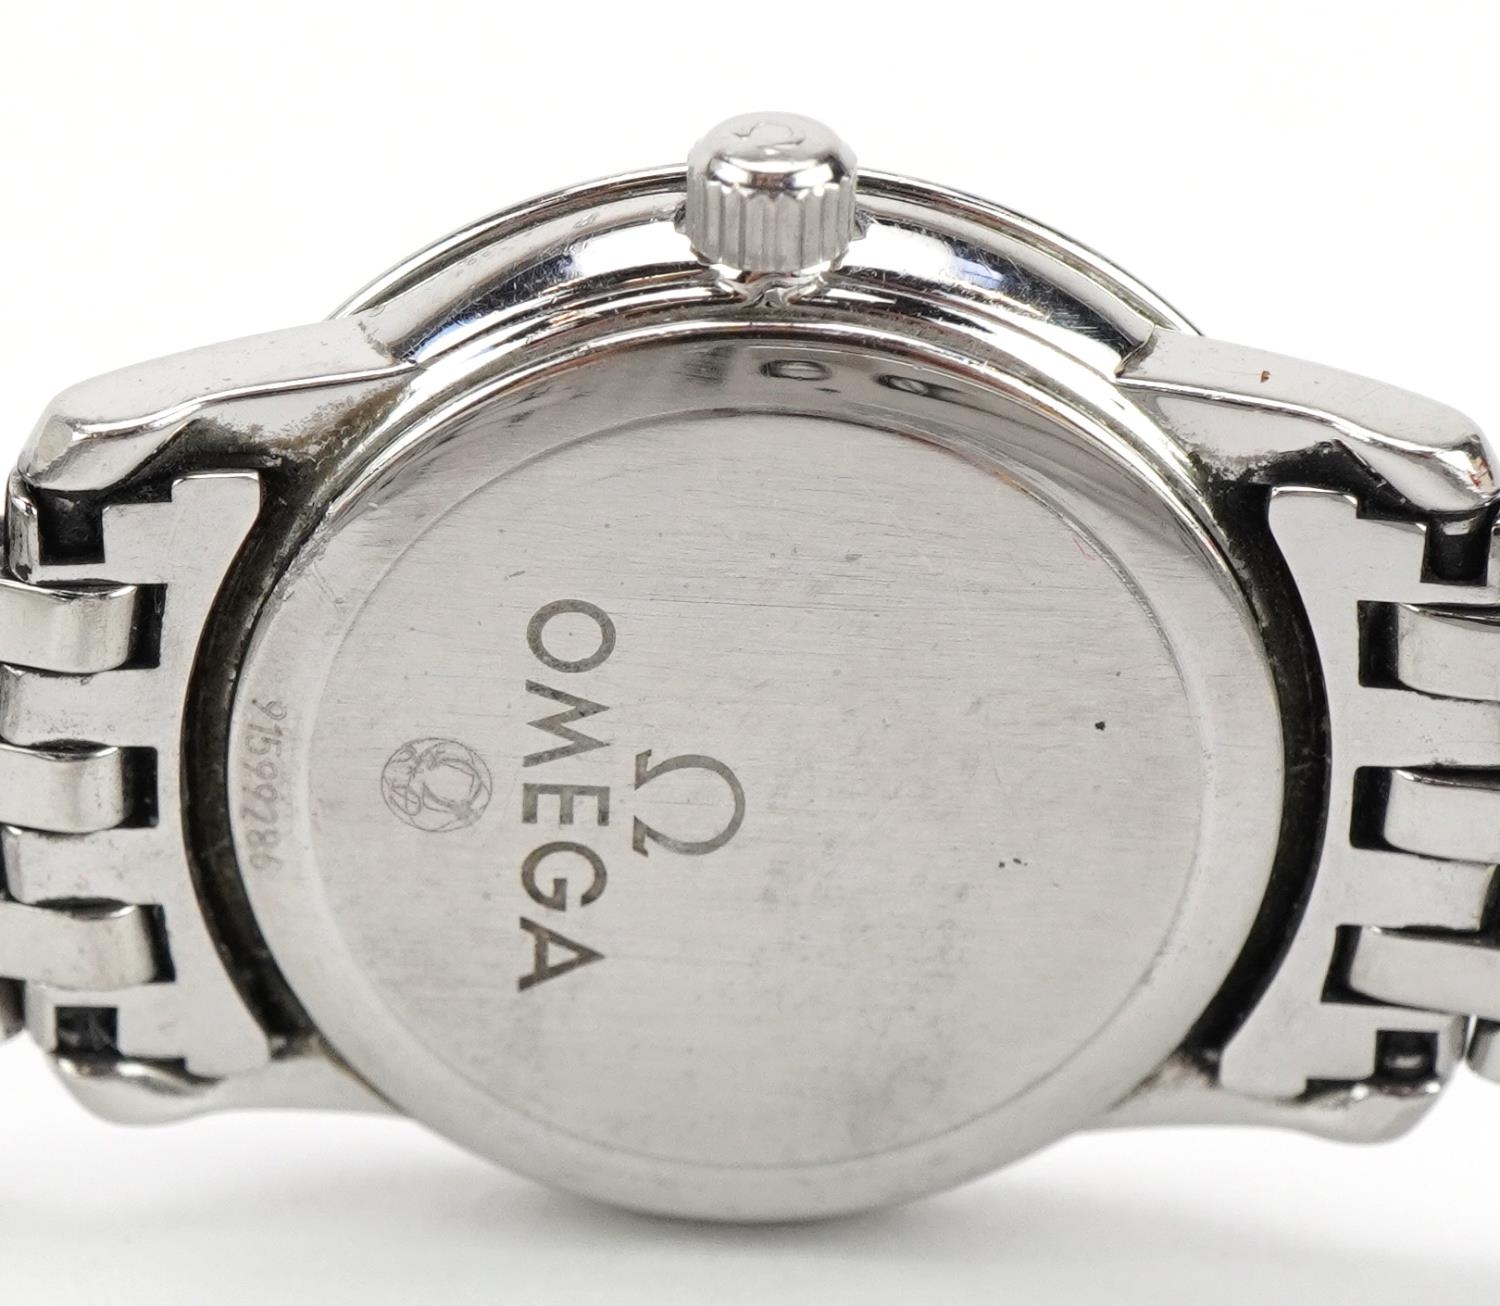 Omega, ladies Omega Deville wristwatch with box and paperwork, 22mm in diameter - Image 4 of 6